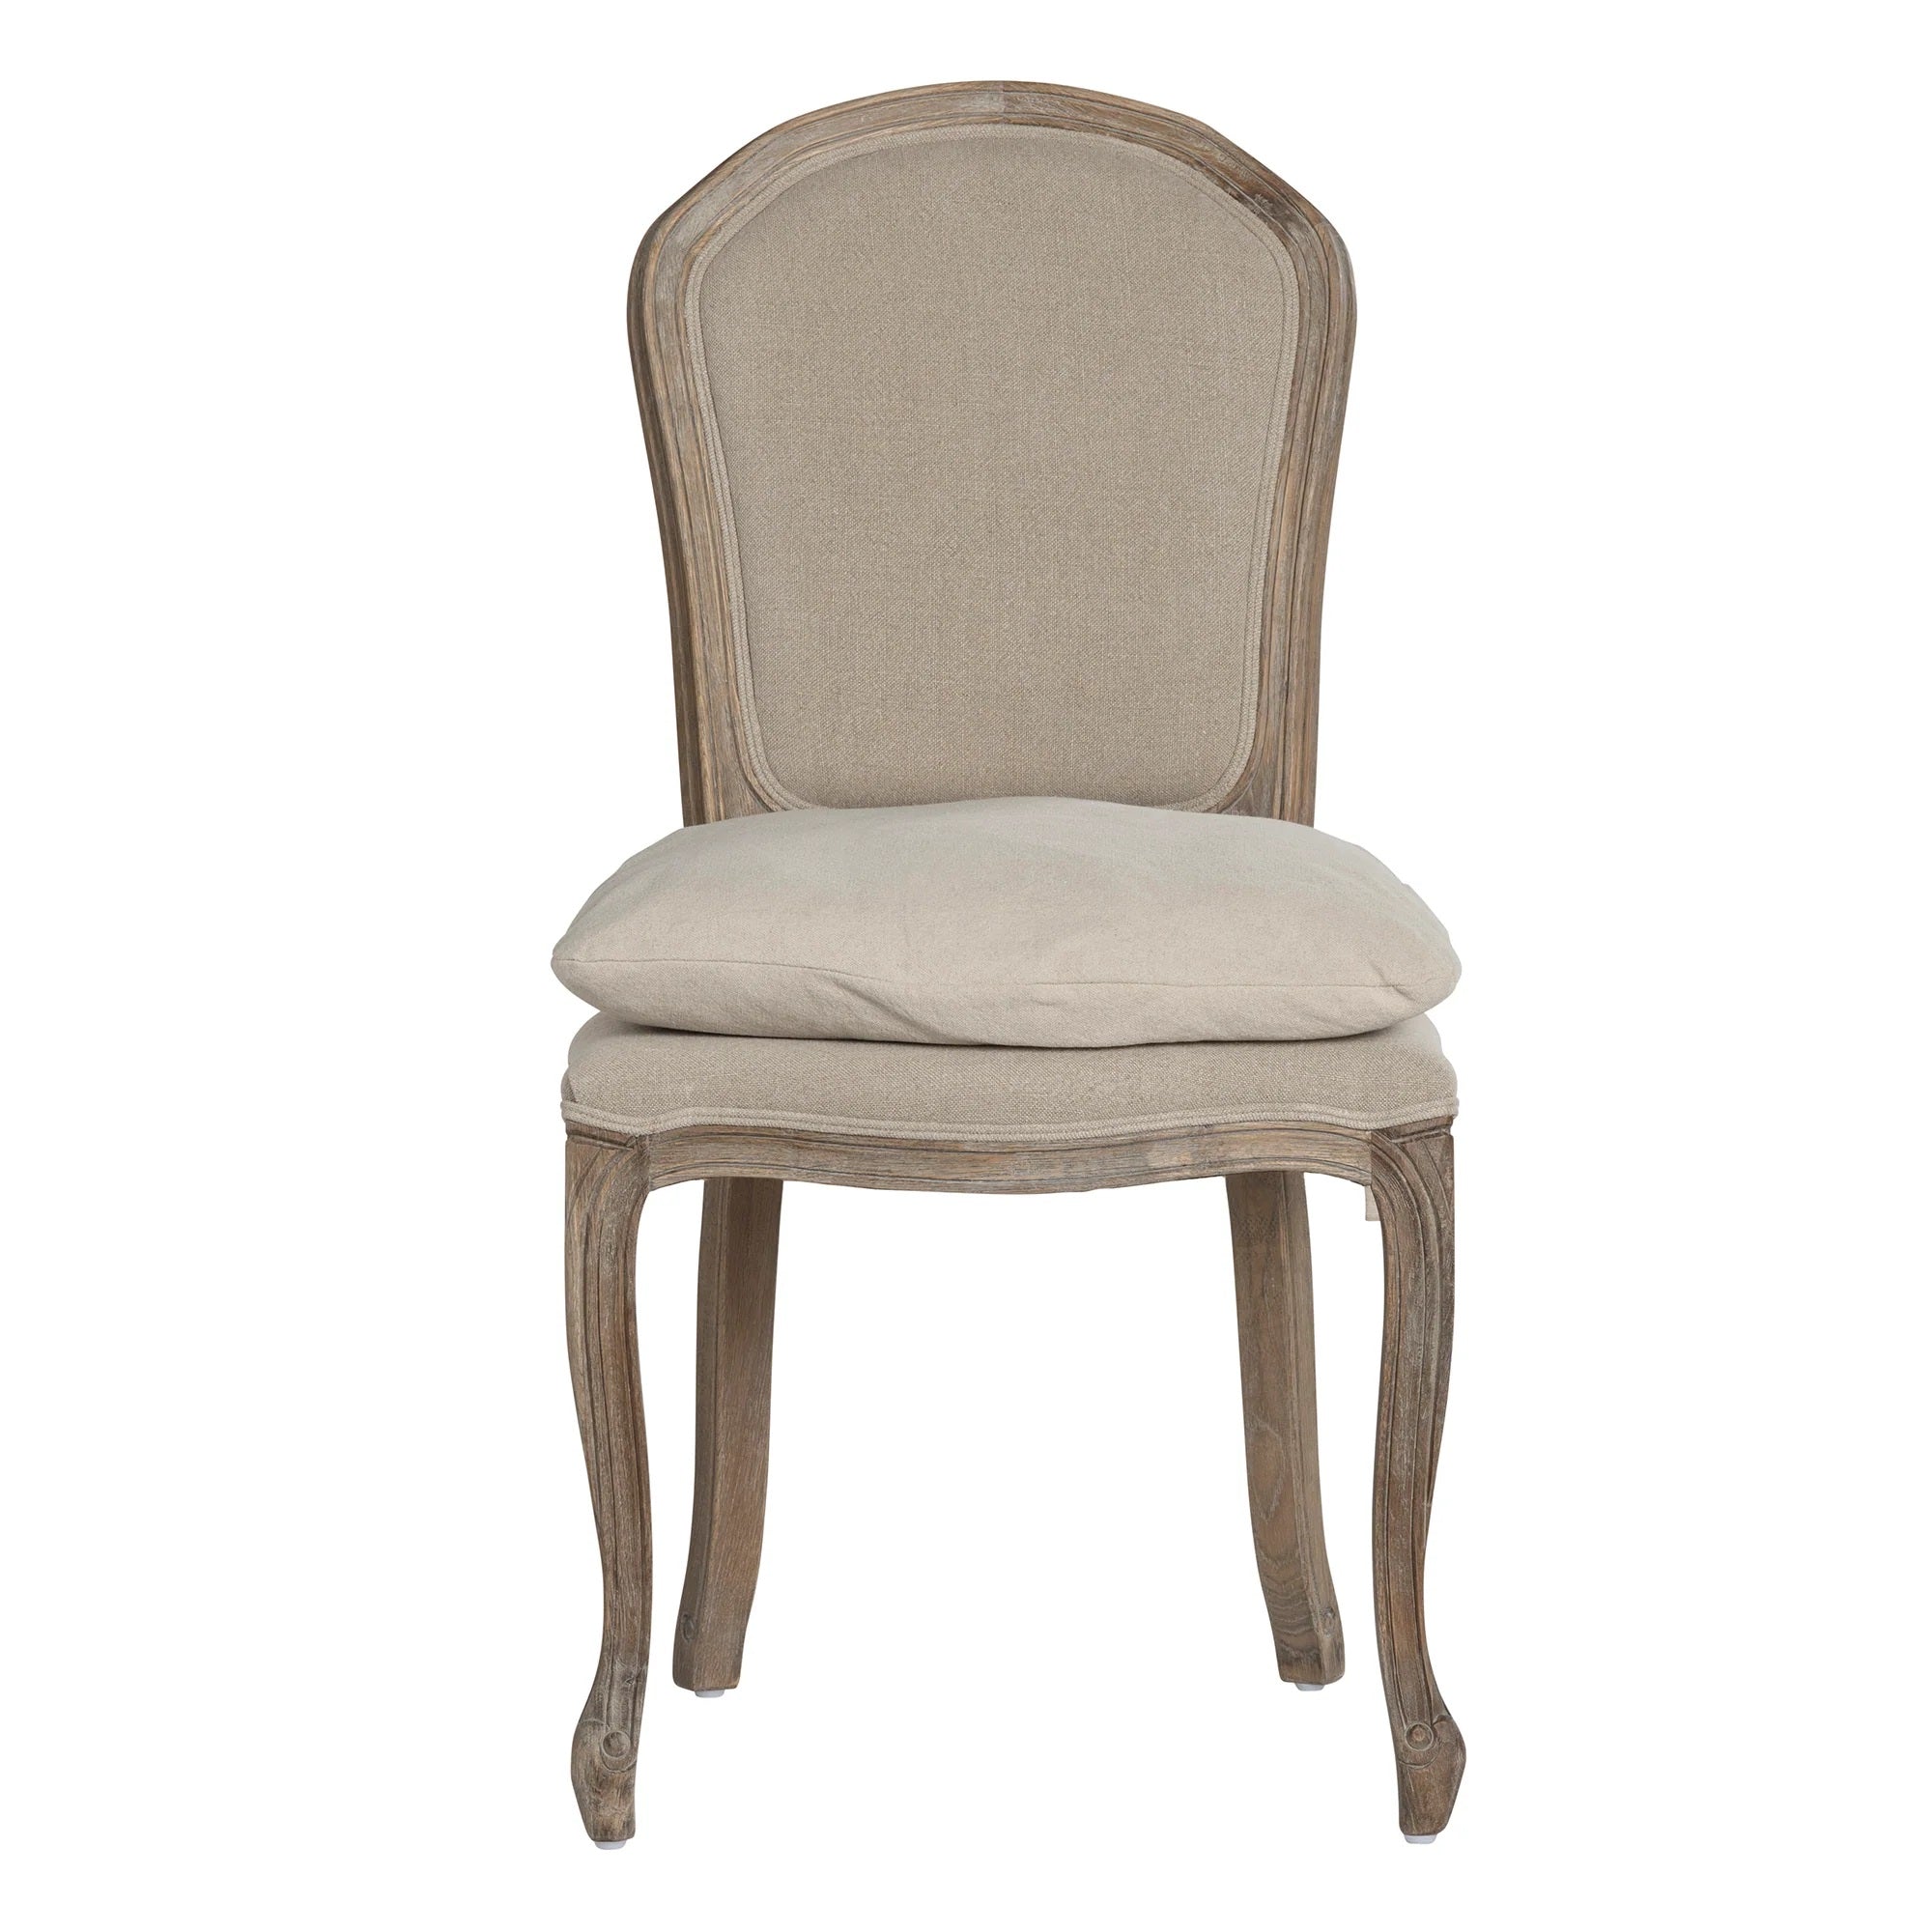 French Upholstered Dining Chairs for Sale, Restoration Hardware Dining Chairs